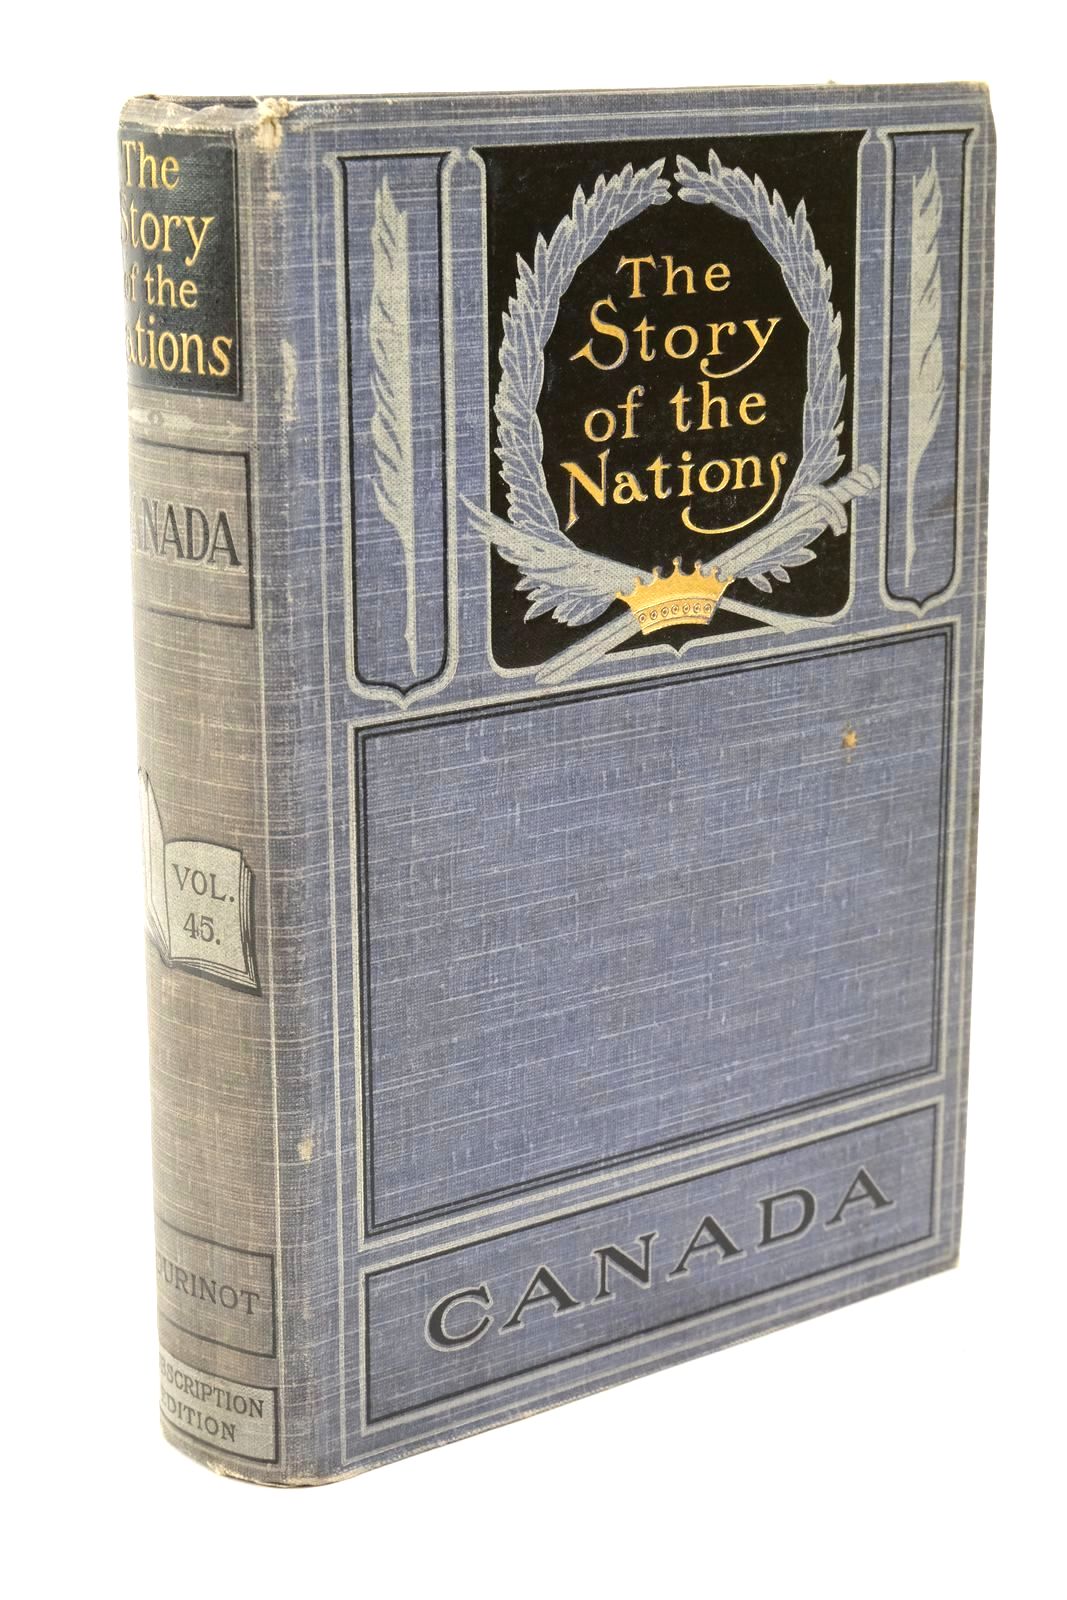 Photo of CANADA written by Bourinot, J.G. published by T. Fisher Unwin (STOCK CODE: 1322584)  for sale by Stella & Rose's Books